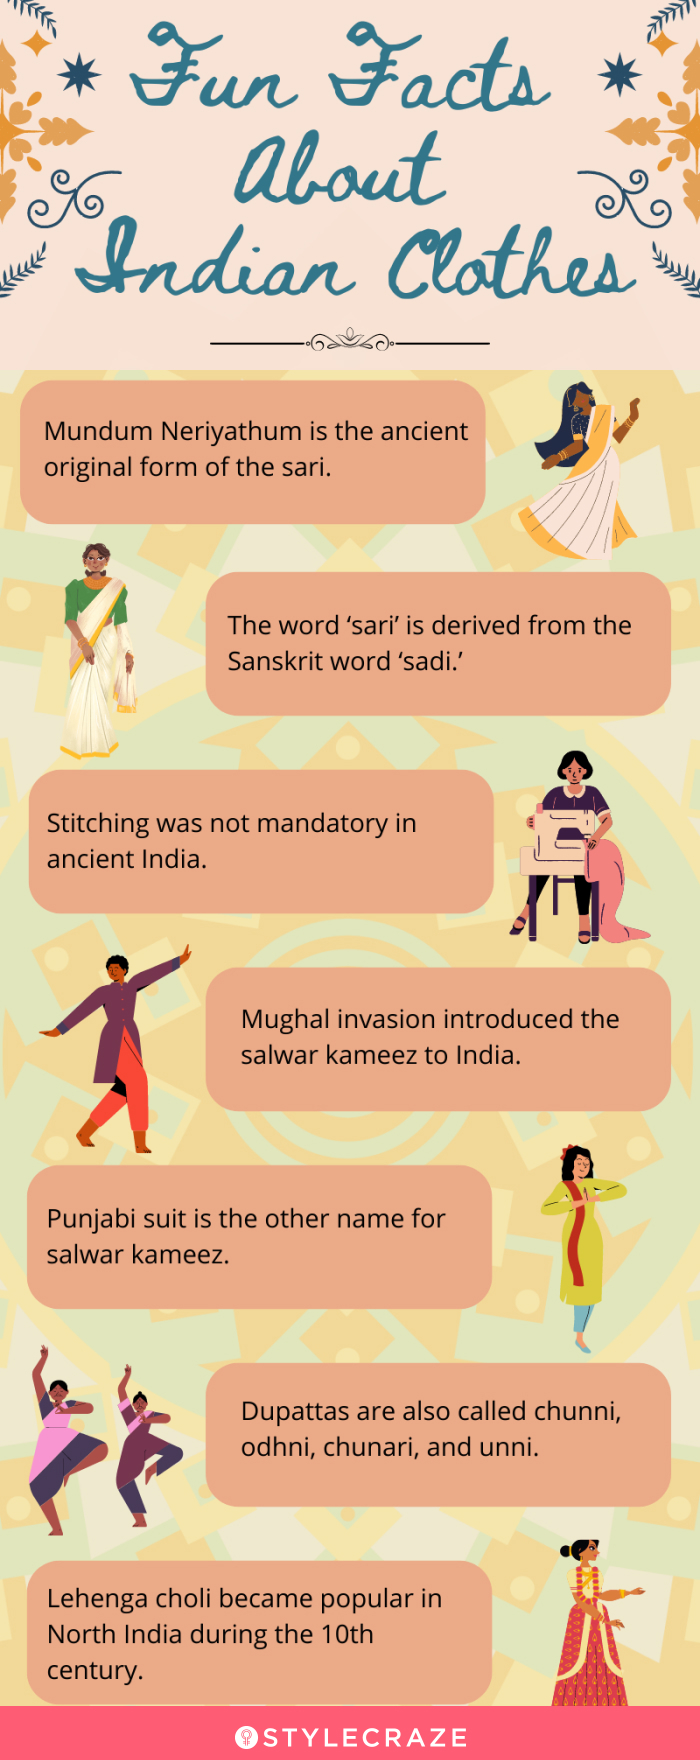 fun facts about indian clothes (infographic)